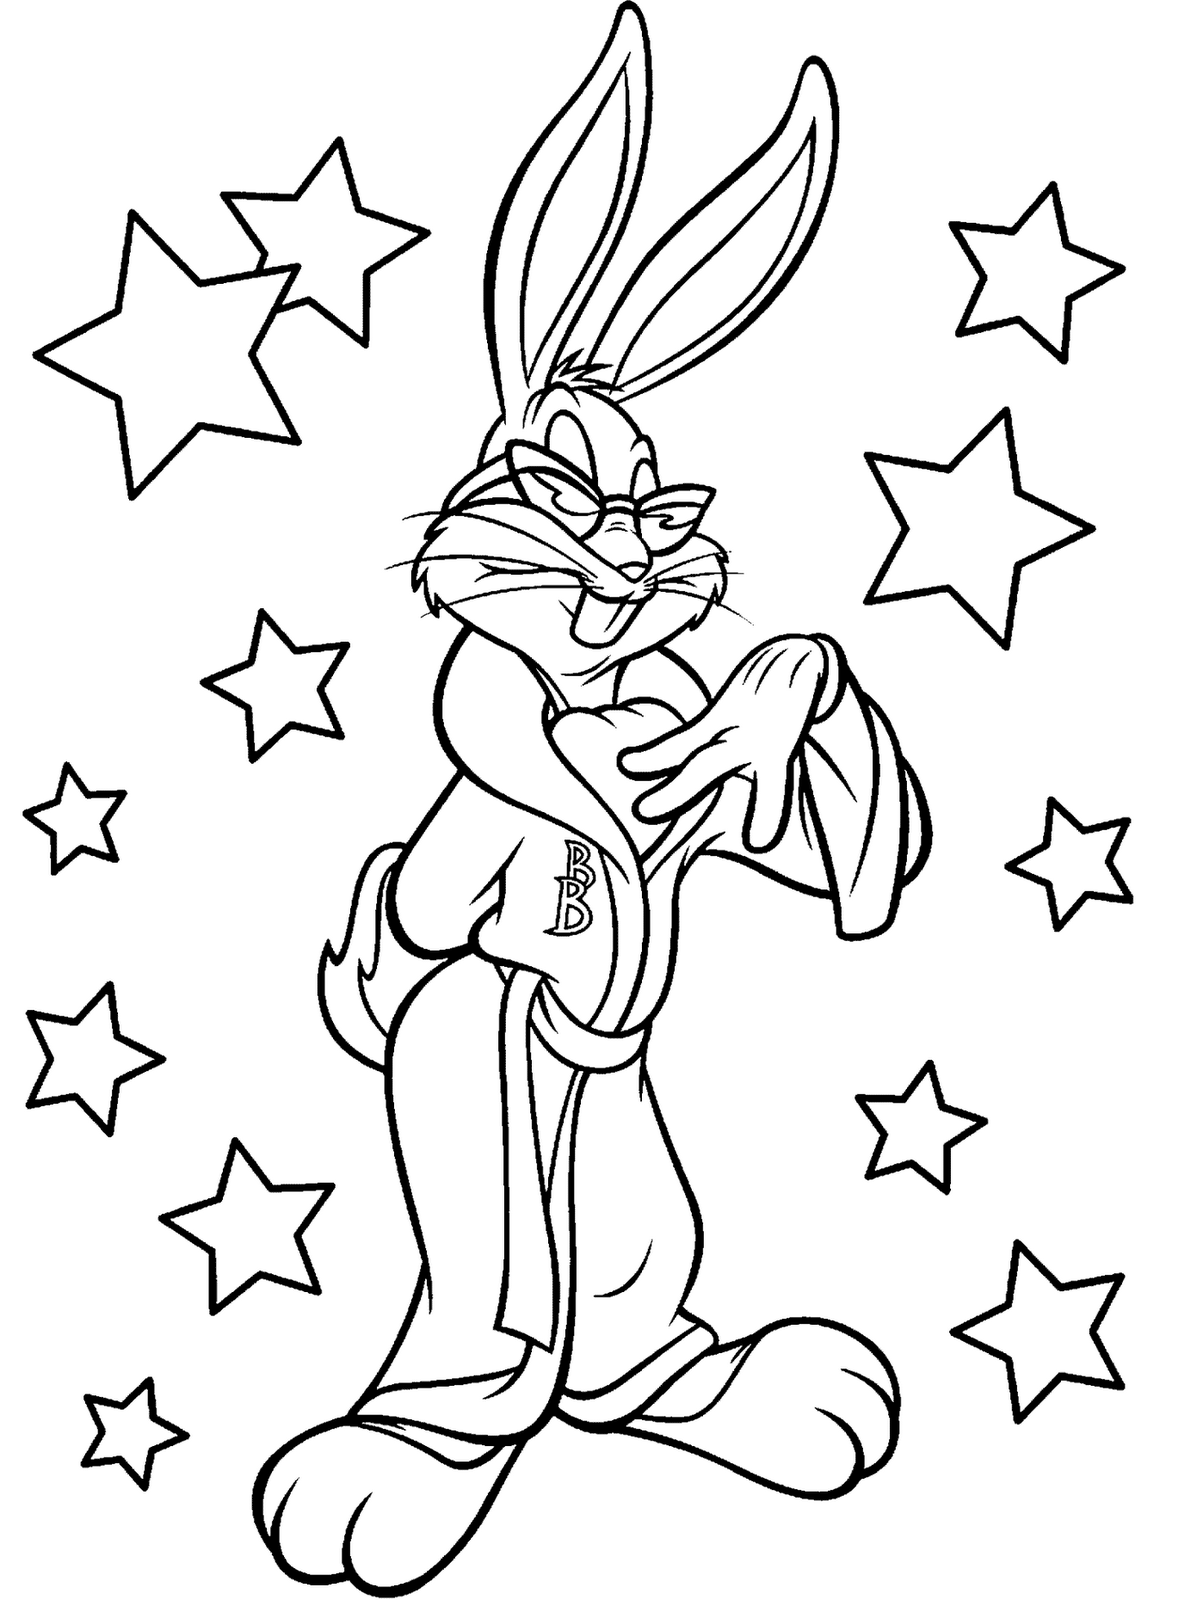 Download transmissionpress: Bunny Star Coloring Pages